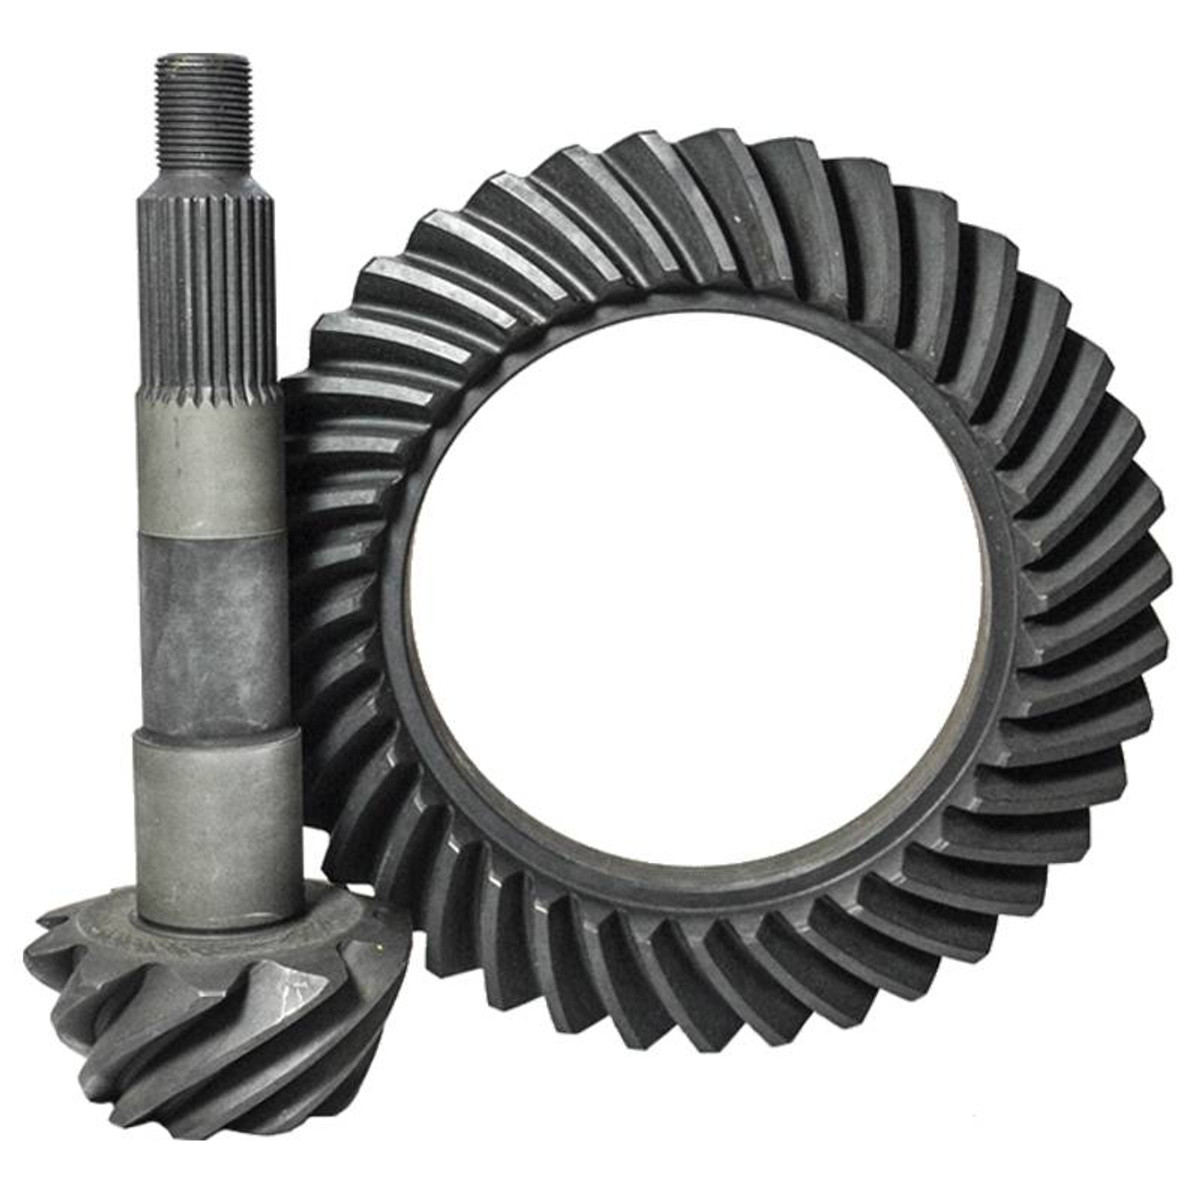 Toyota 8 Inch 5.29 Ratio Reverse Ring And Pinion T8R-529R-NG